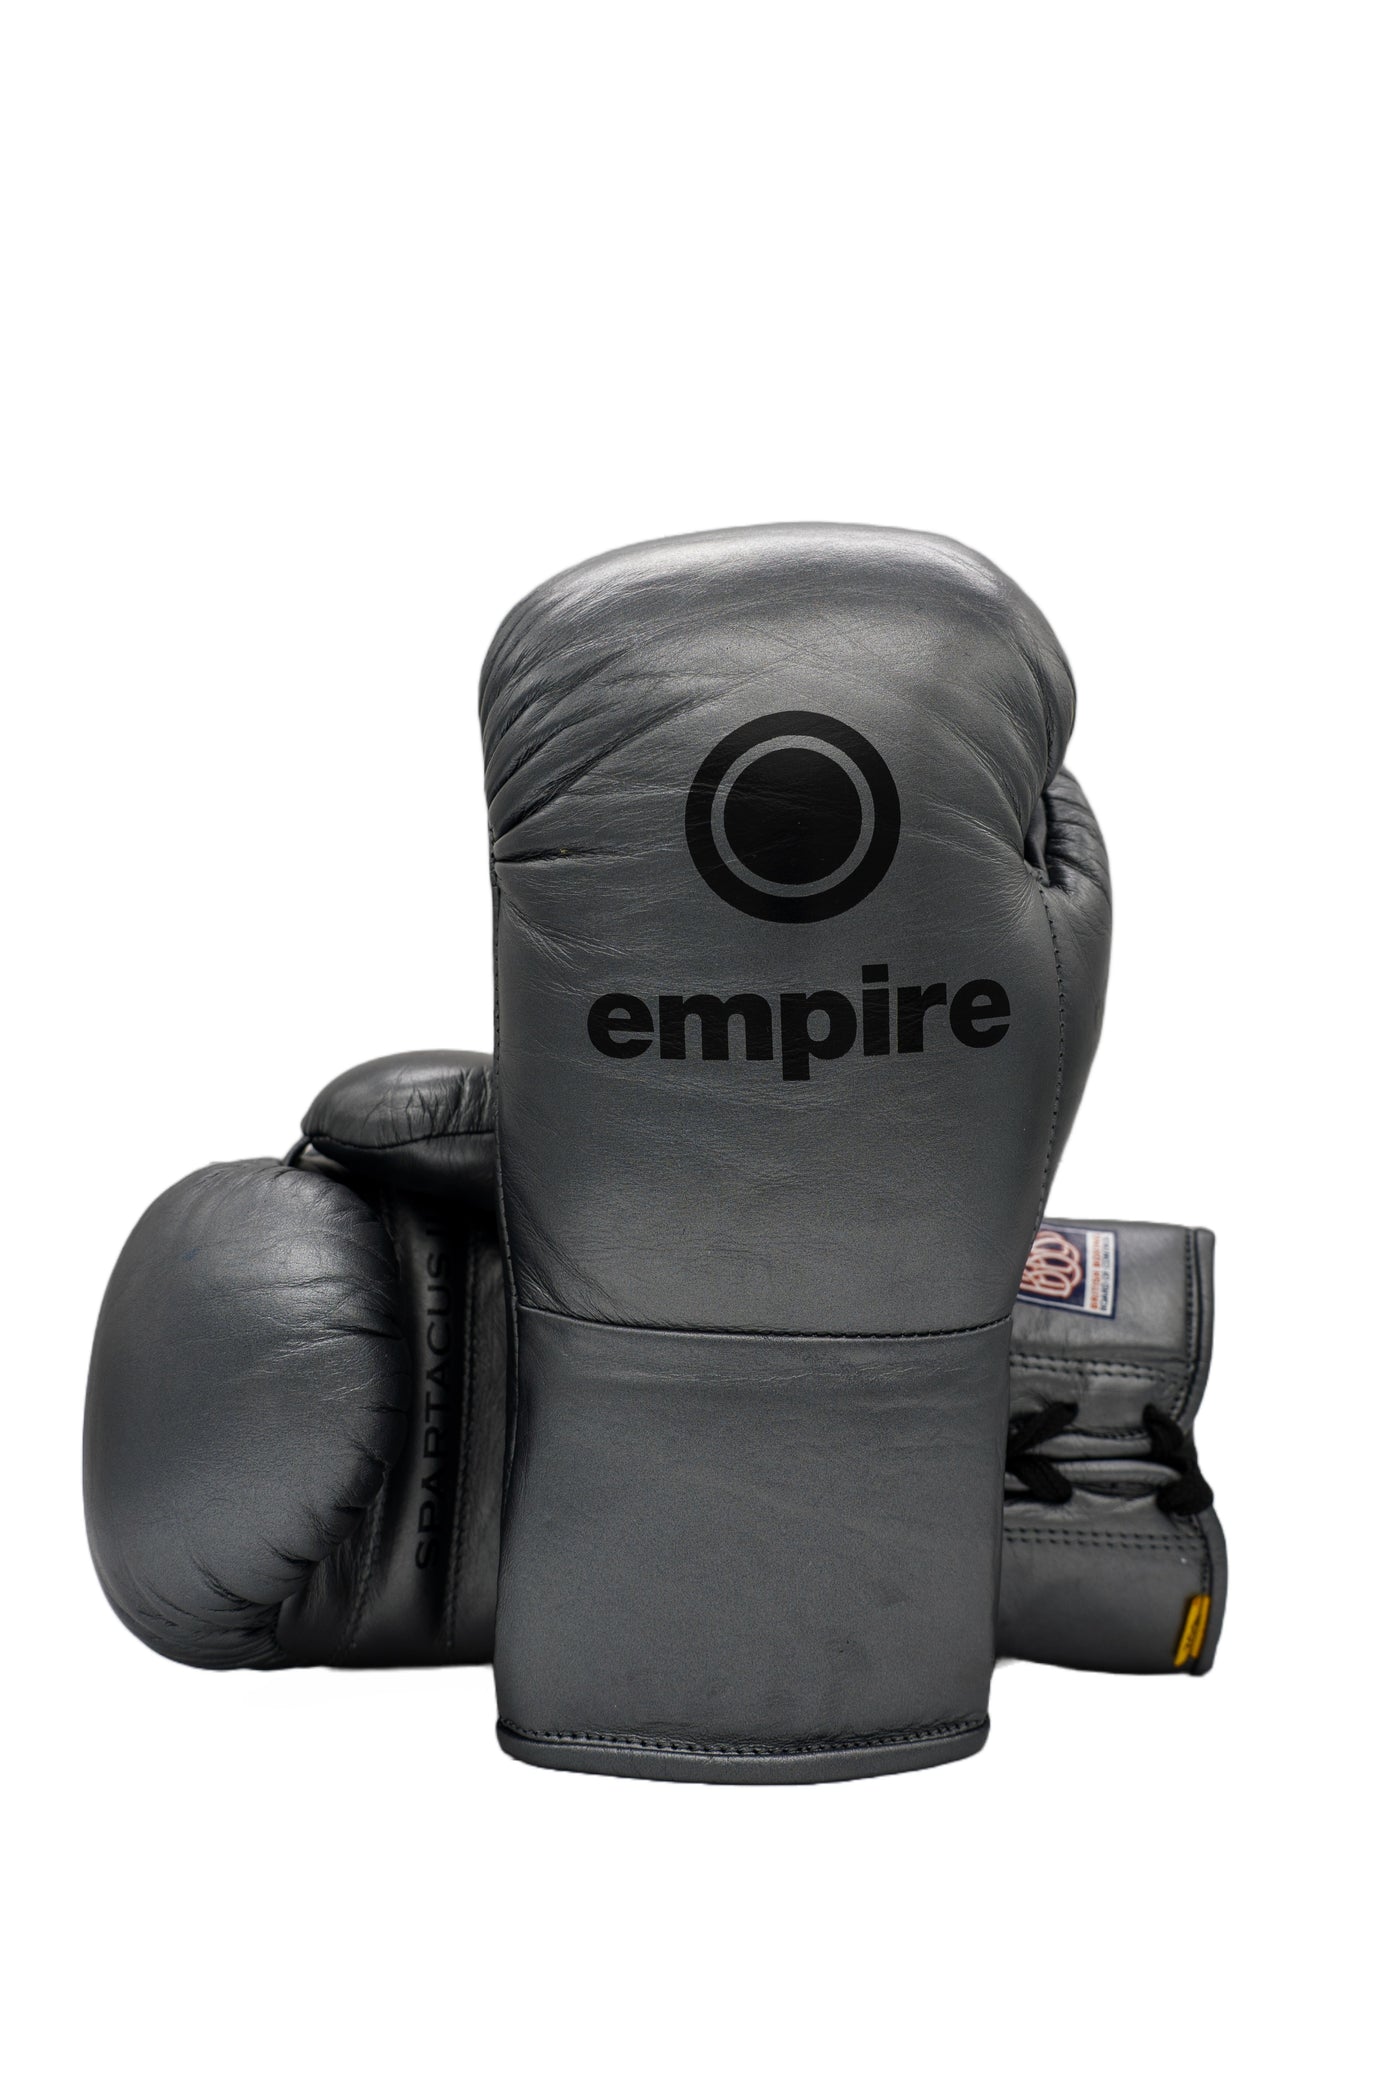 SPARTACUS II Sparring Gloves (Laces)